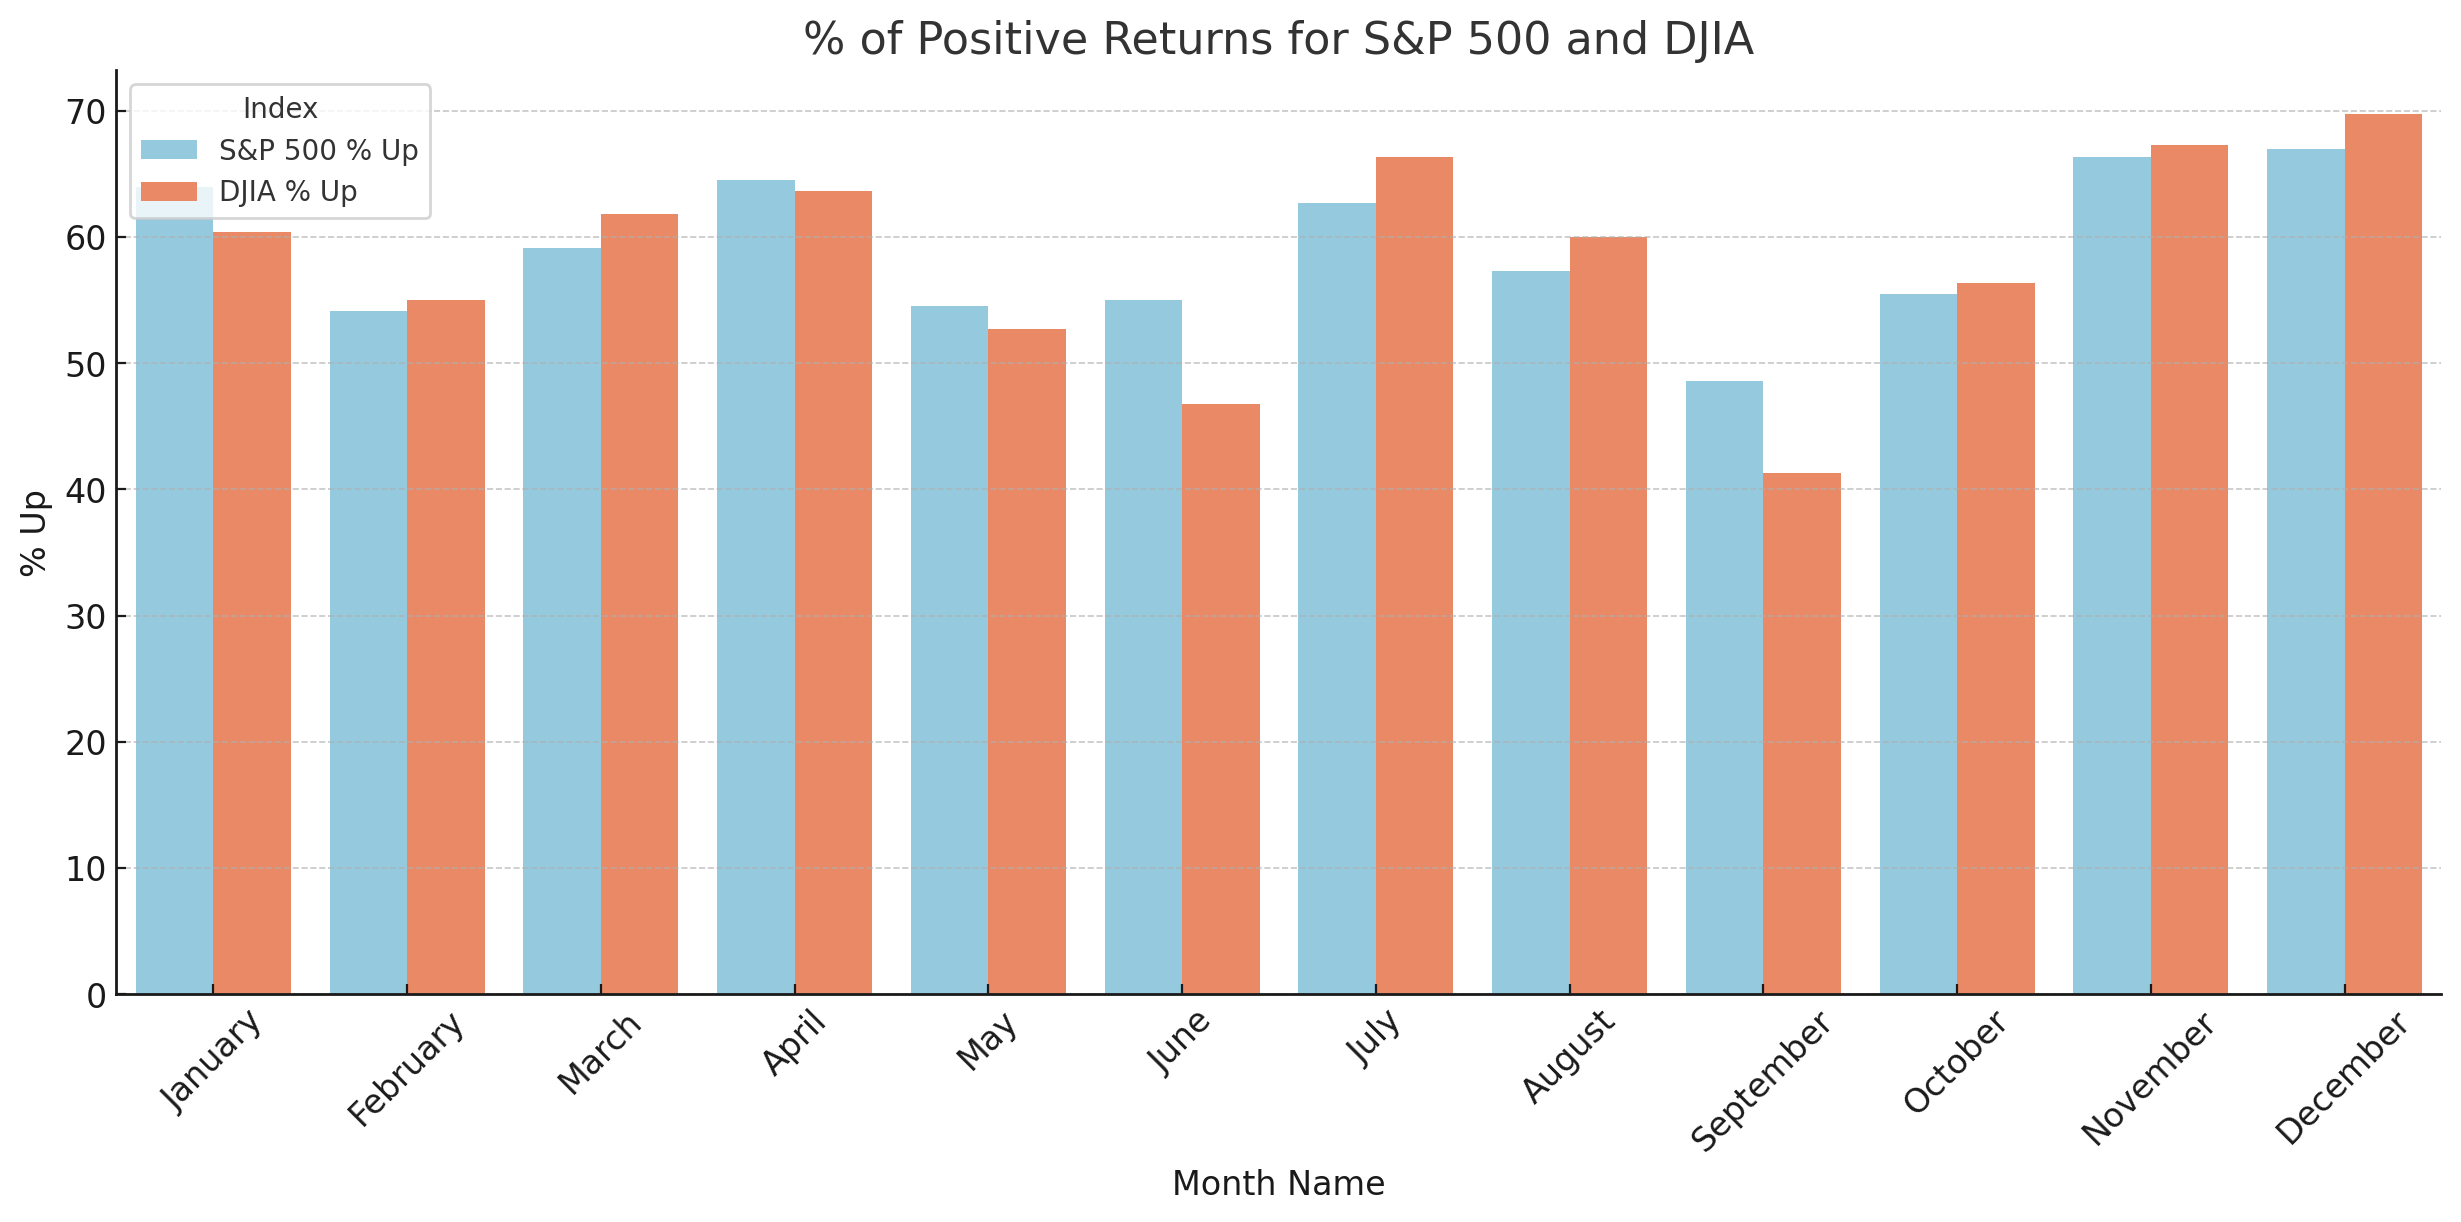 S&P 500 and DJIA-Positive Returns